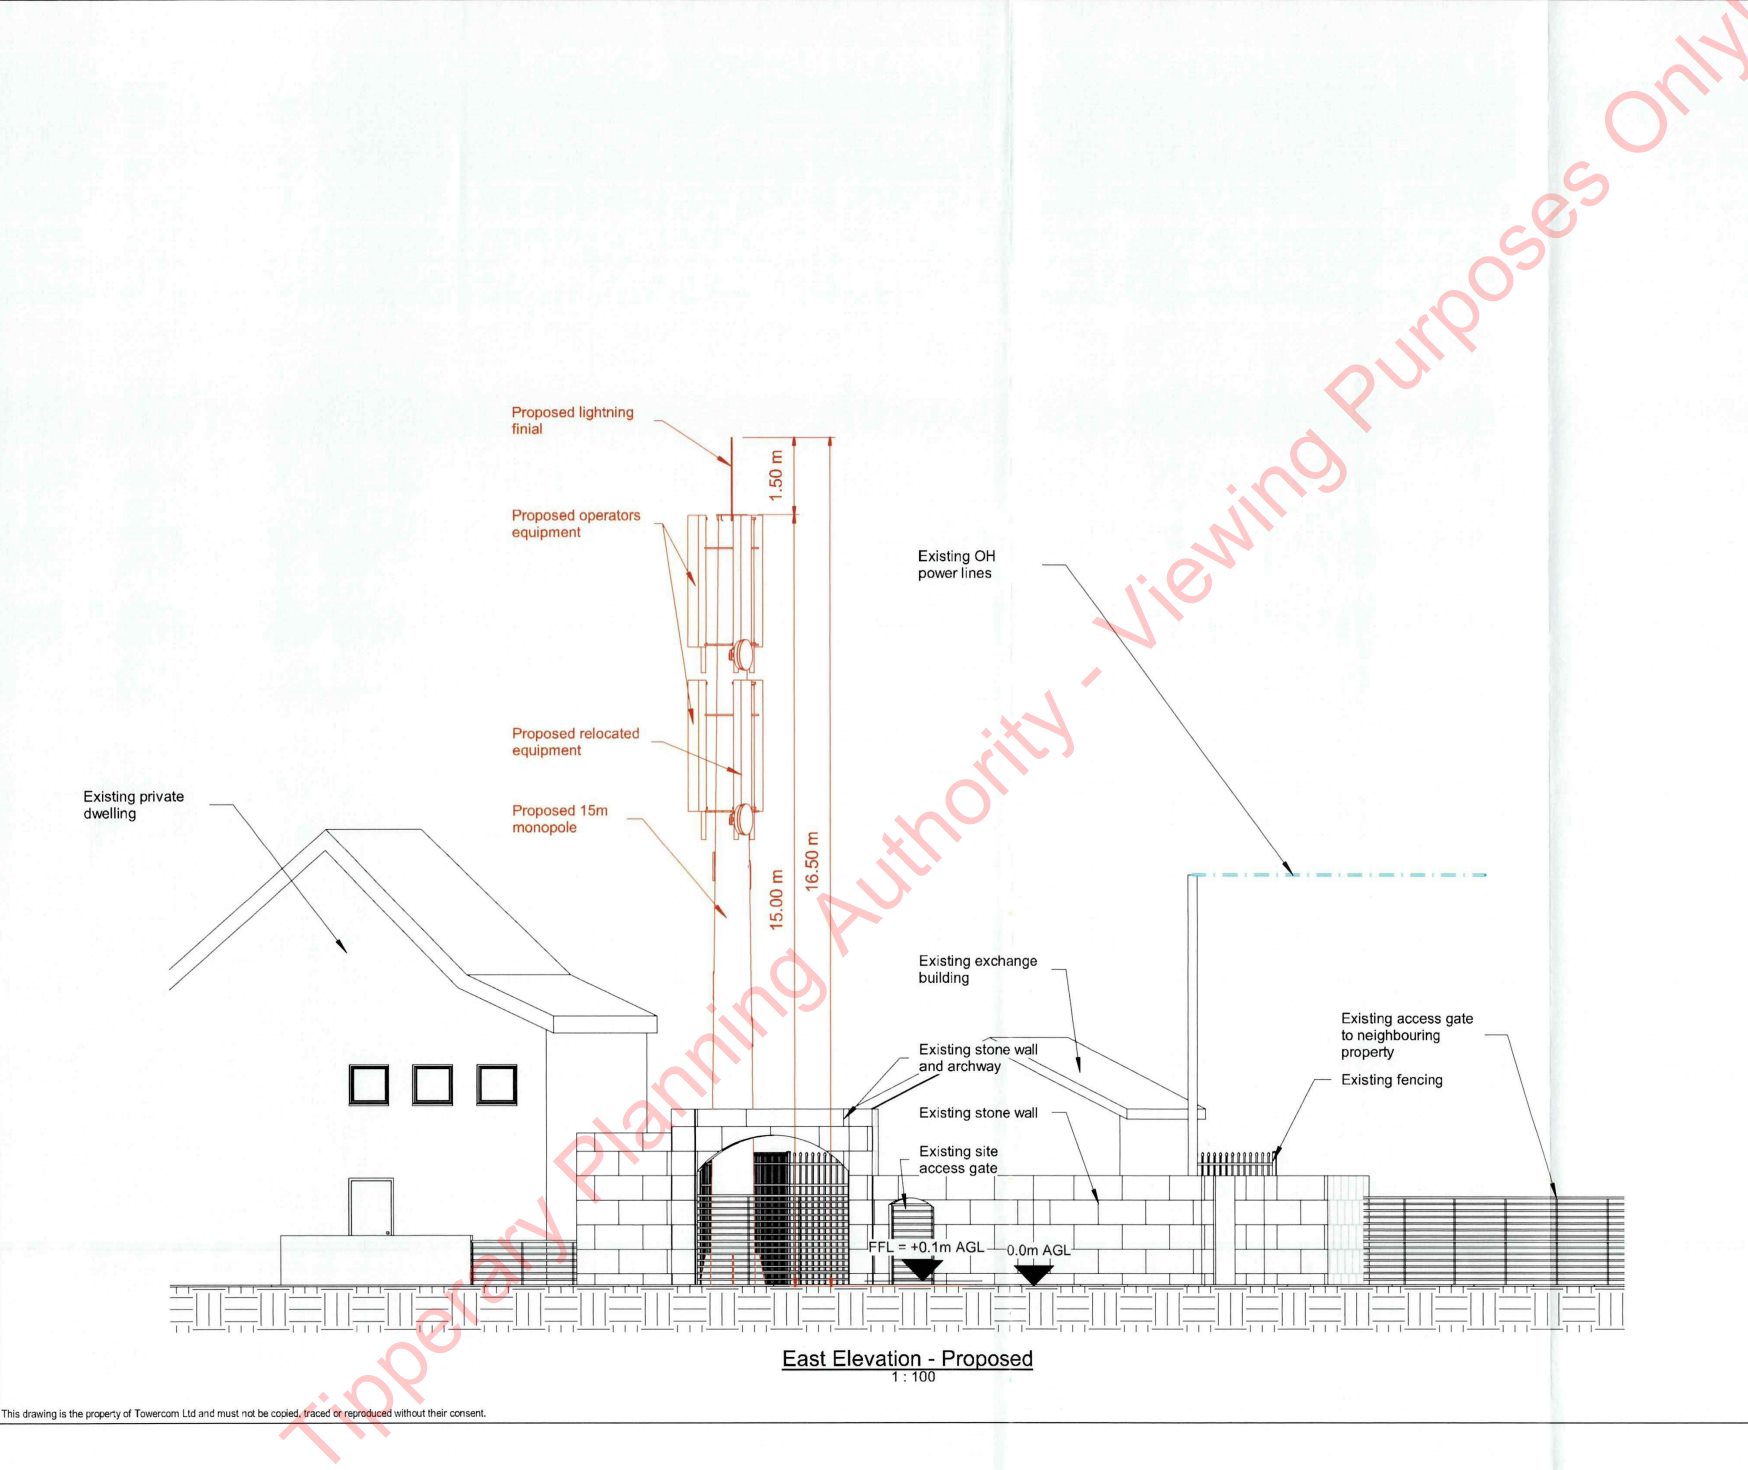 A new planning application has been received by Tipperary County Council for permission to erect a 15-metre-high monopole together with antennae, dishes and other equipment and remove the existing 10m high timber communications pole with antenna at the Eir Exchange, St. Patrick’s Place, Fethard. 